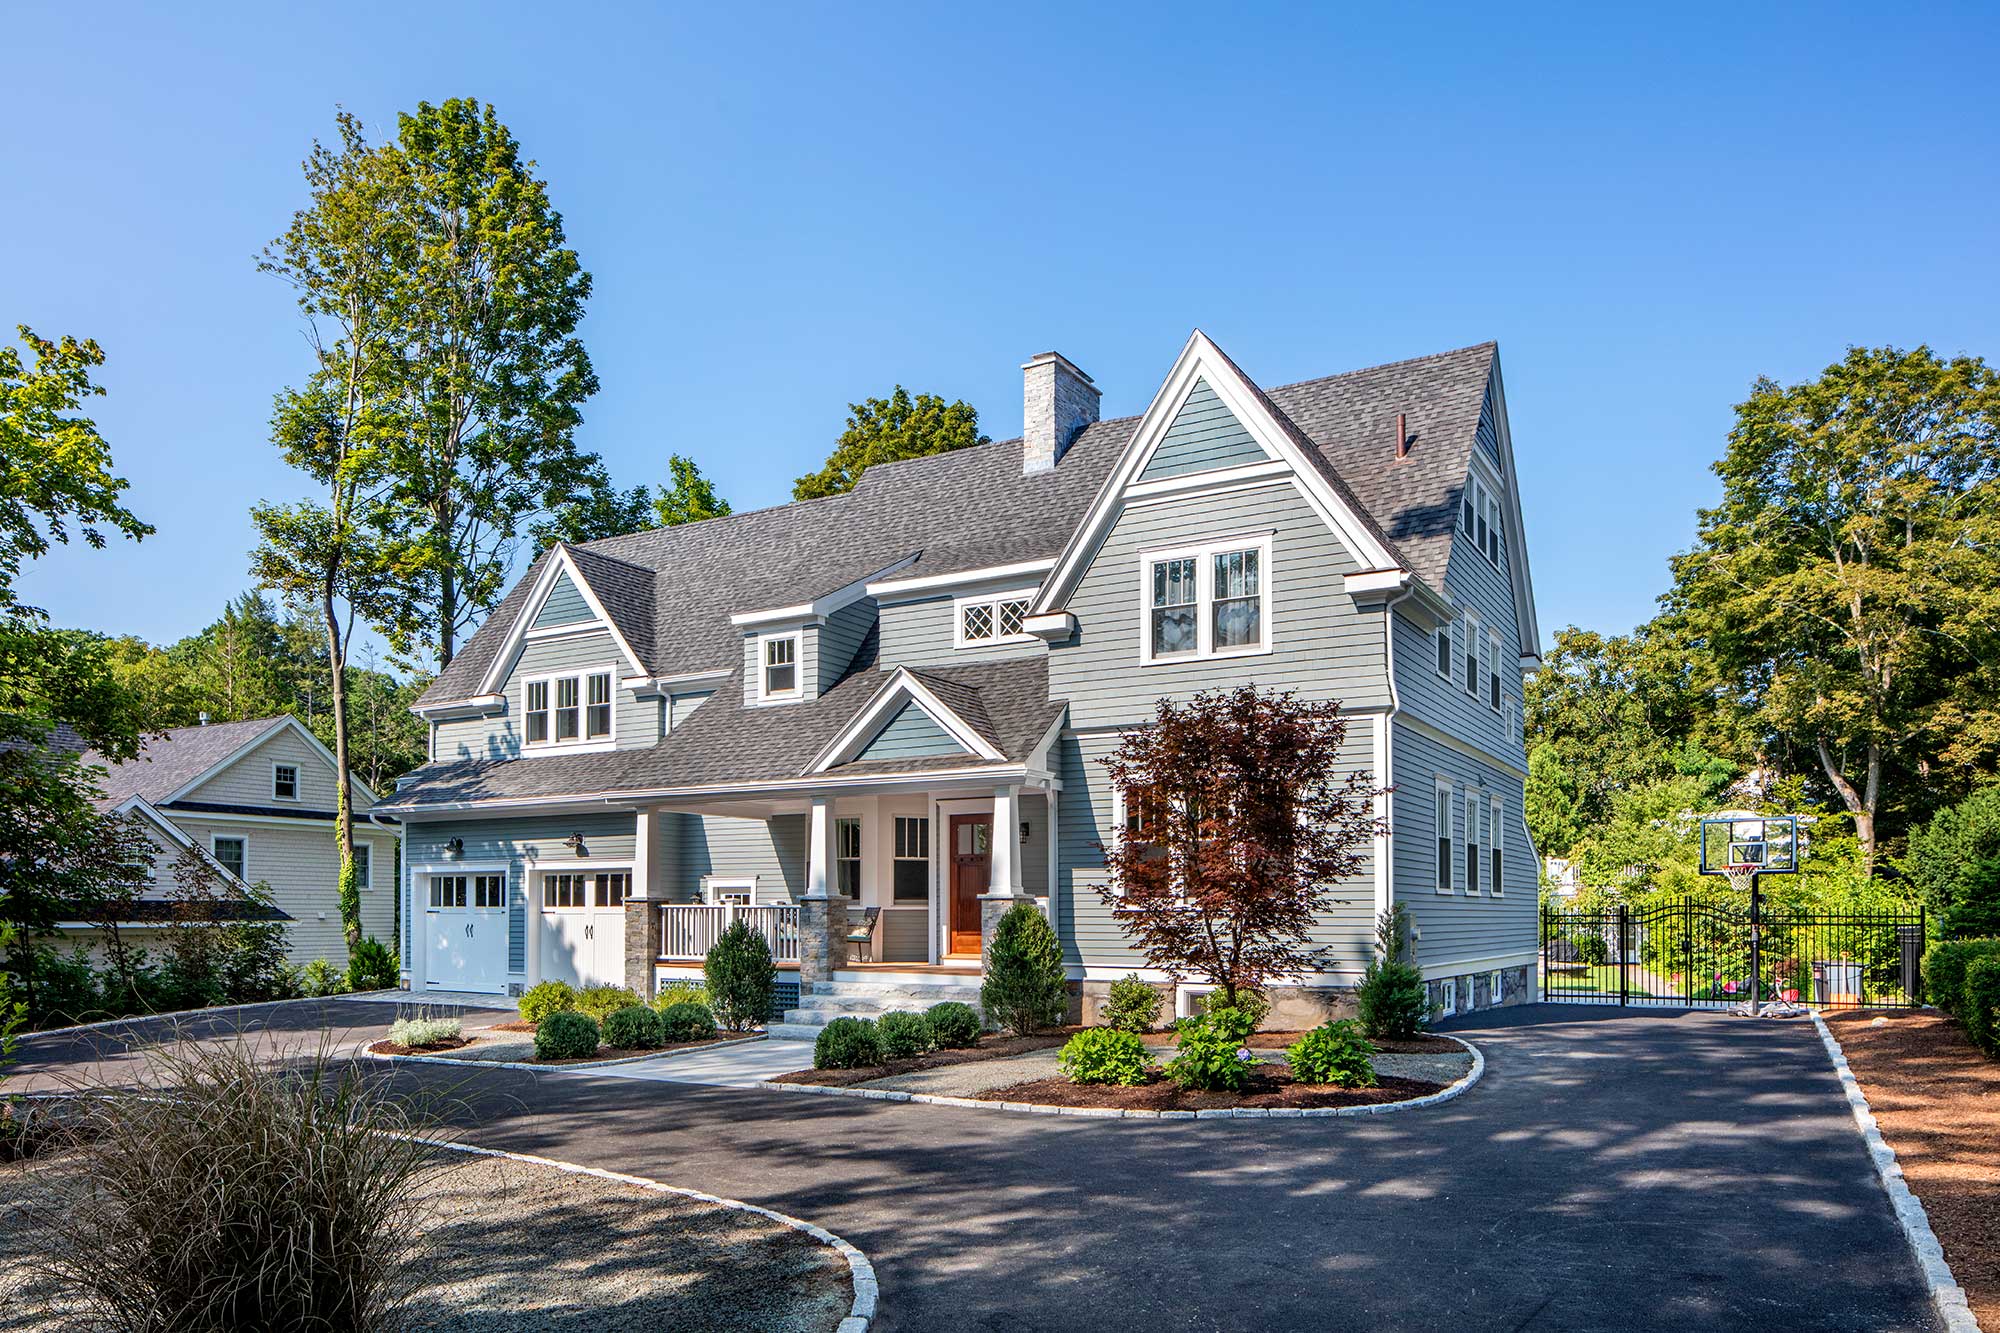 Two-story light blue home with two-car garage